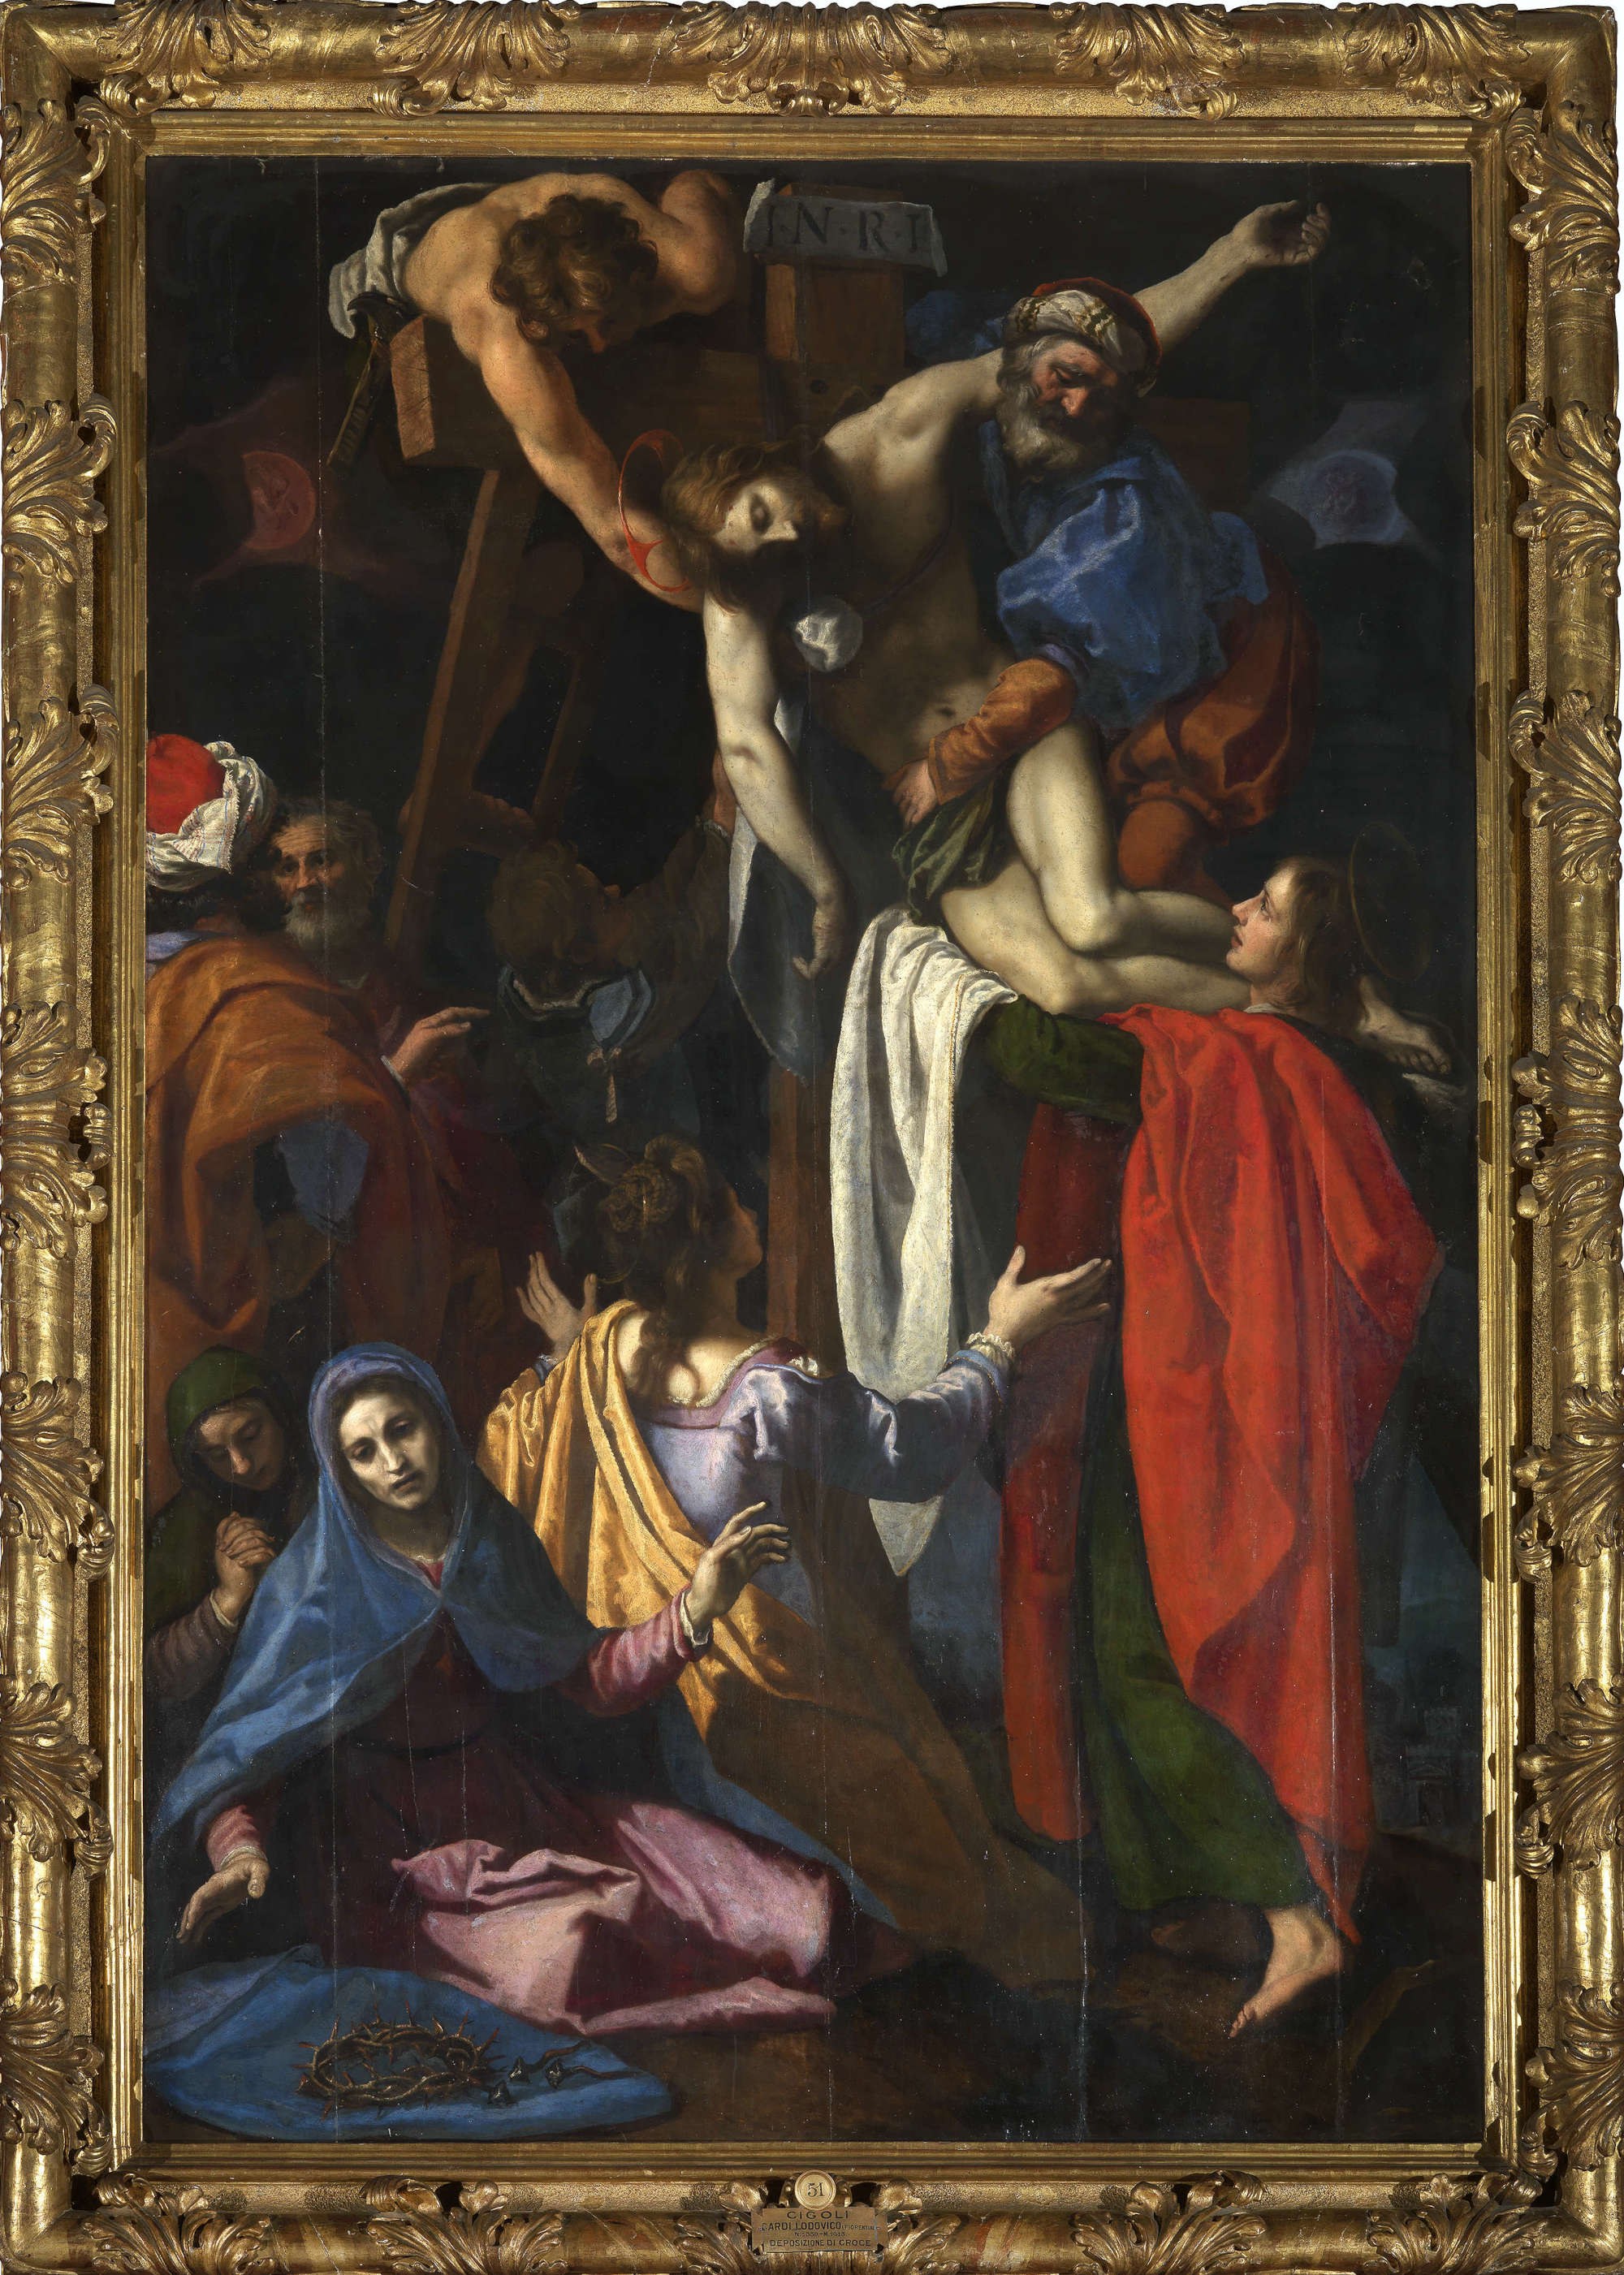 Ludovico Cardi known as Cigoli, Deposition from the Cross (1600-1608; oil on panel, 321 x 206 cm; Florence, Palatine Gallery, Palazzo Pitti)